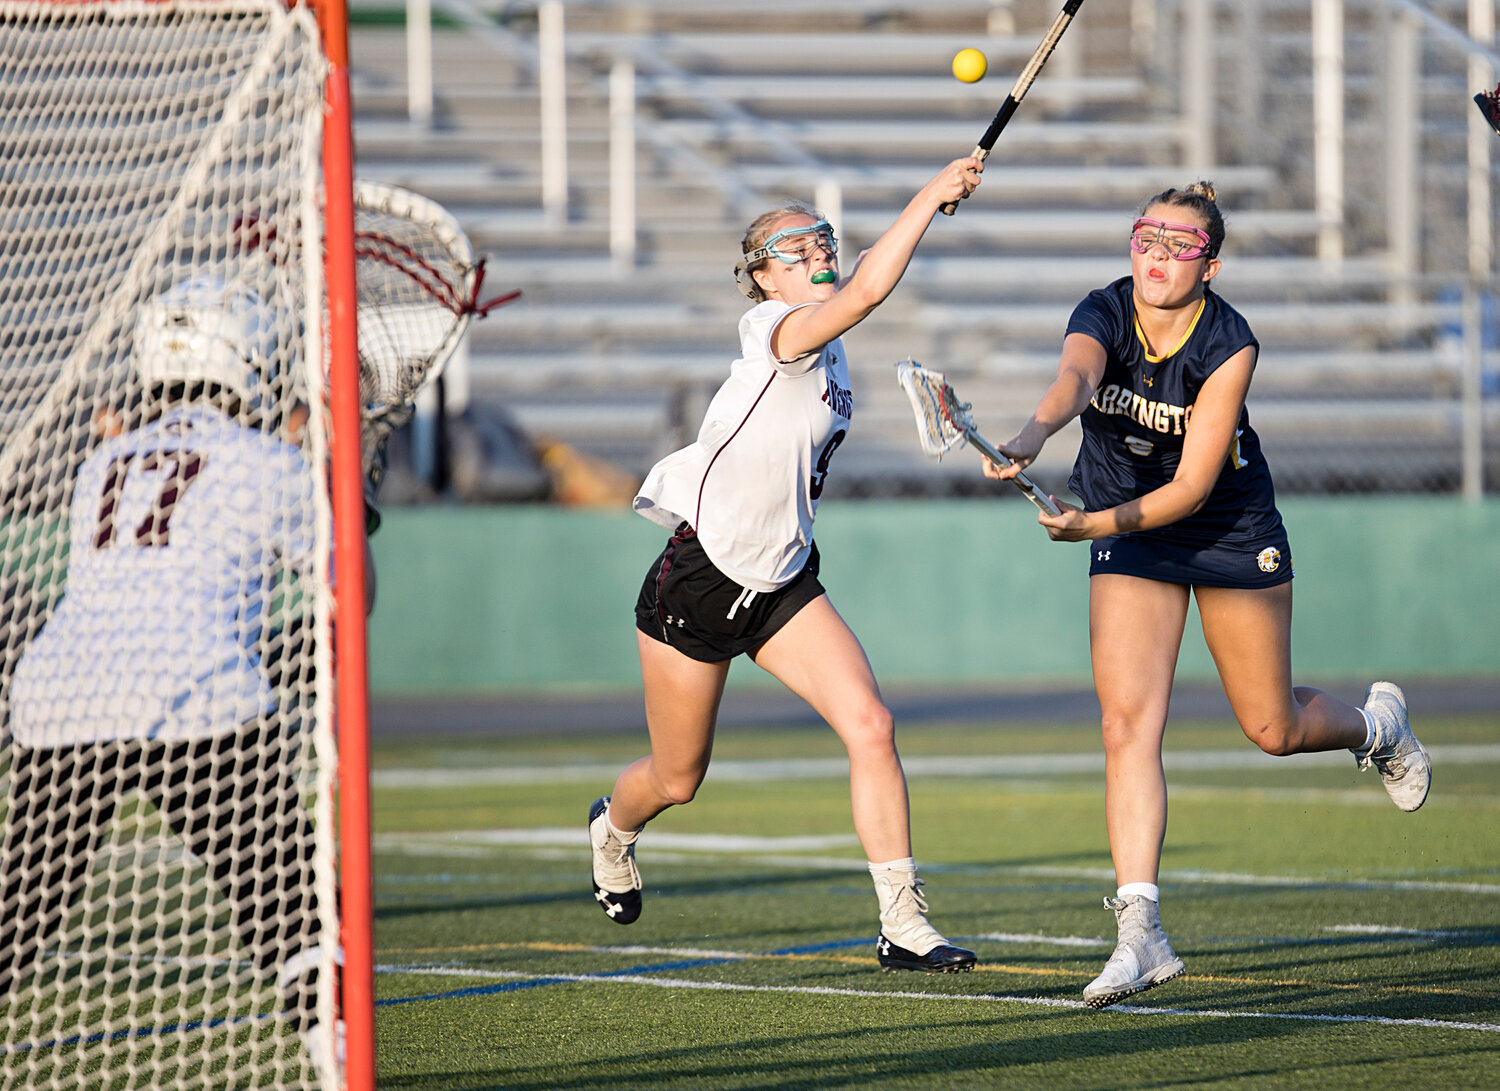 Alexandra Hope fires a shot into the net while battling East Greenwich in the Division I semifinals, Thursday.